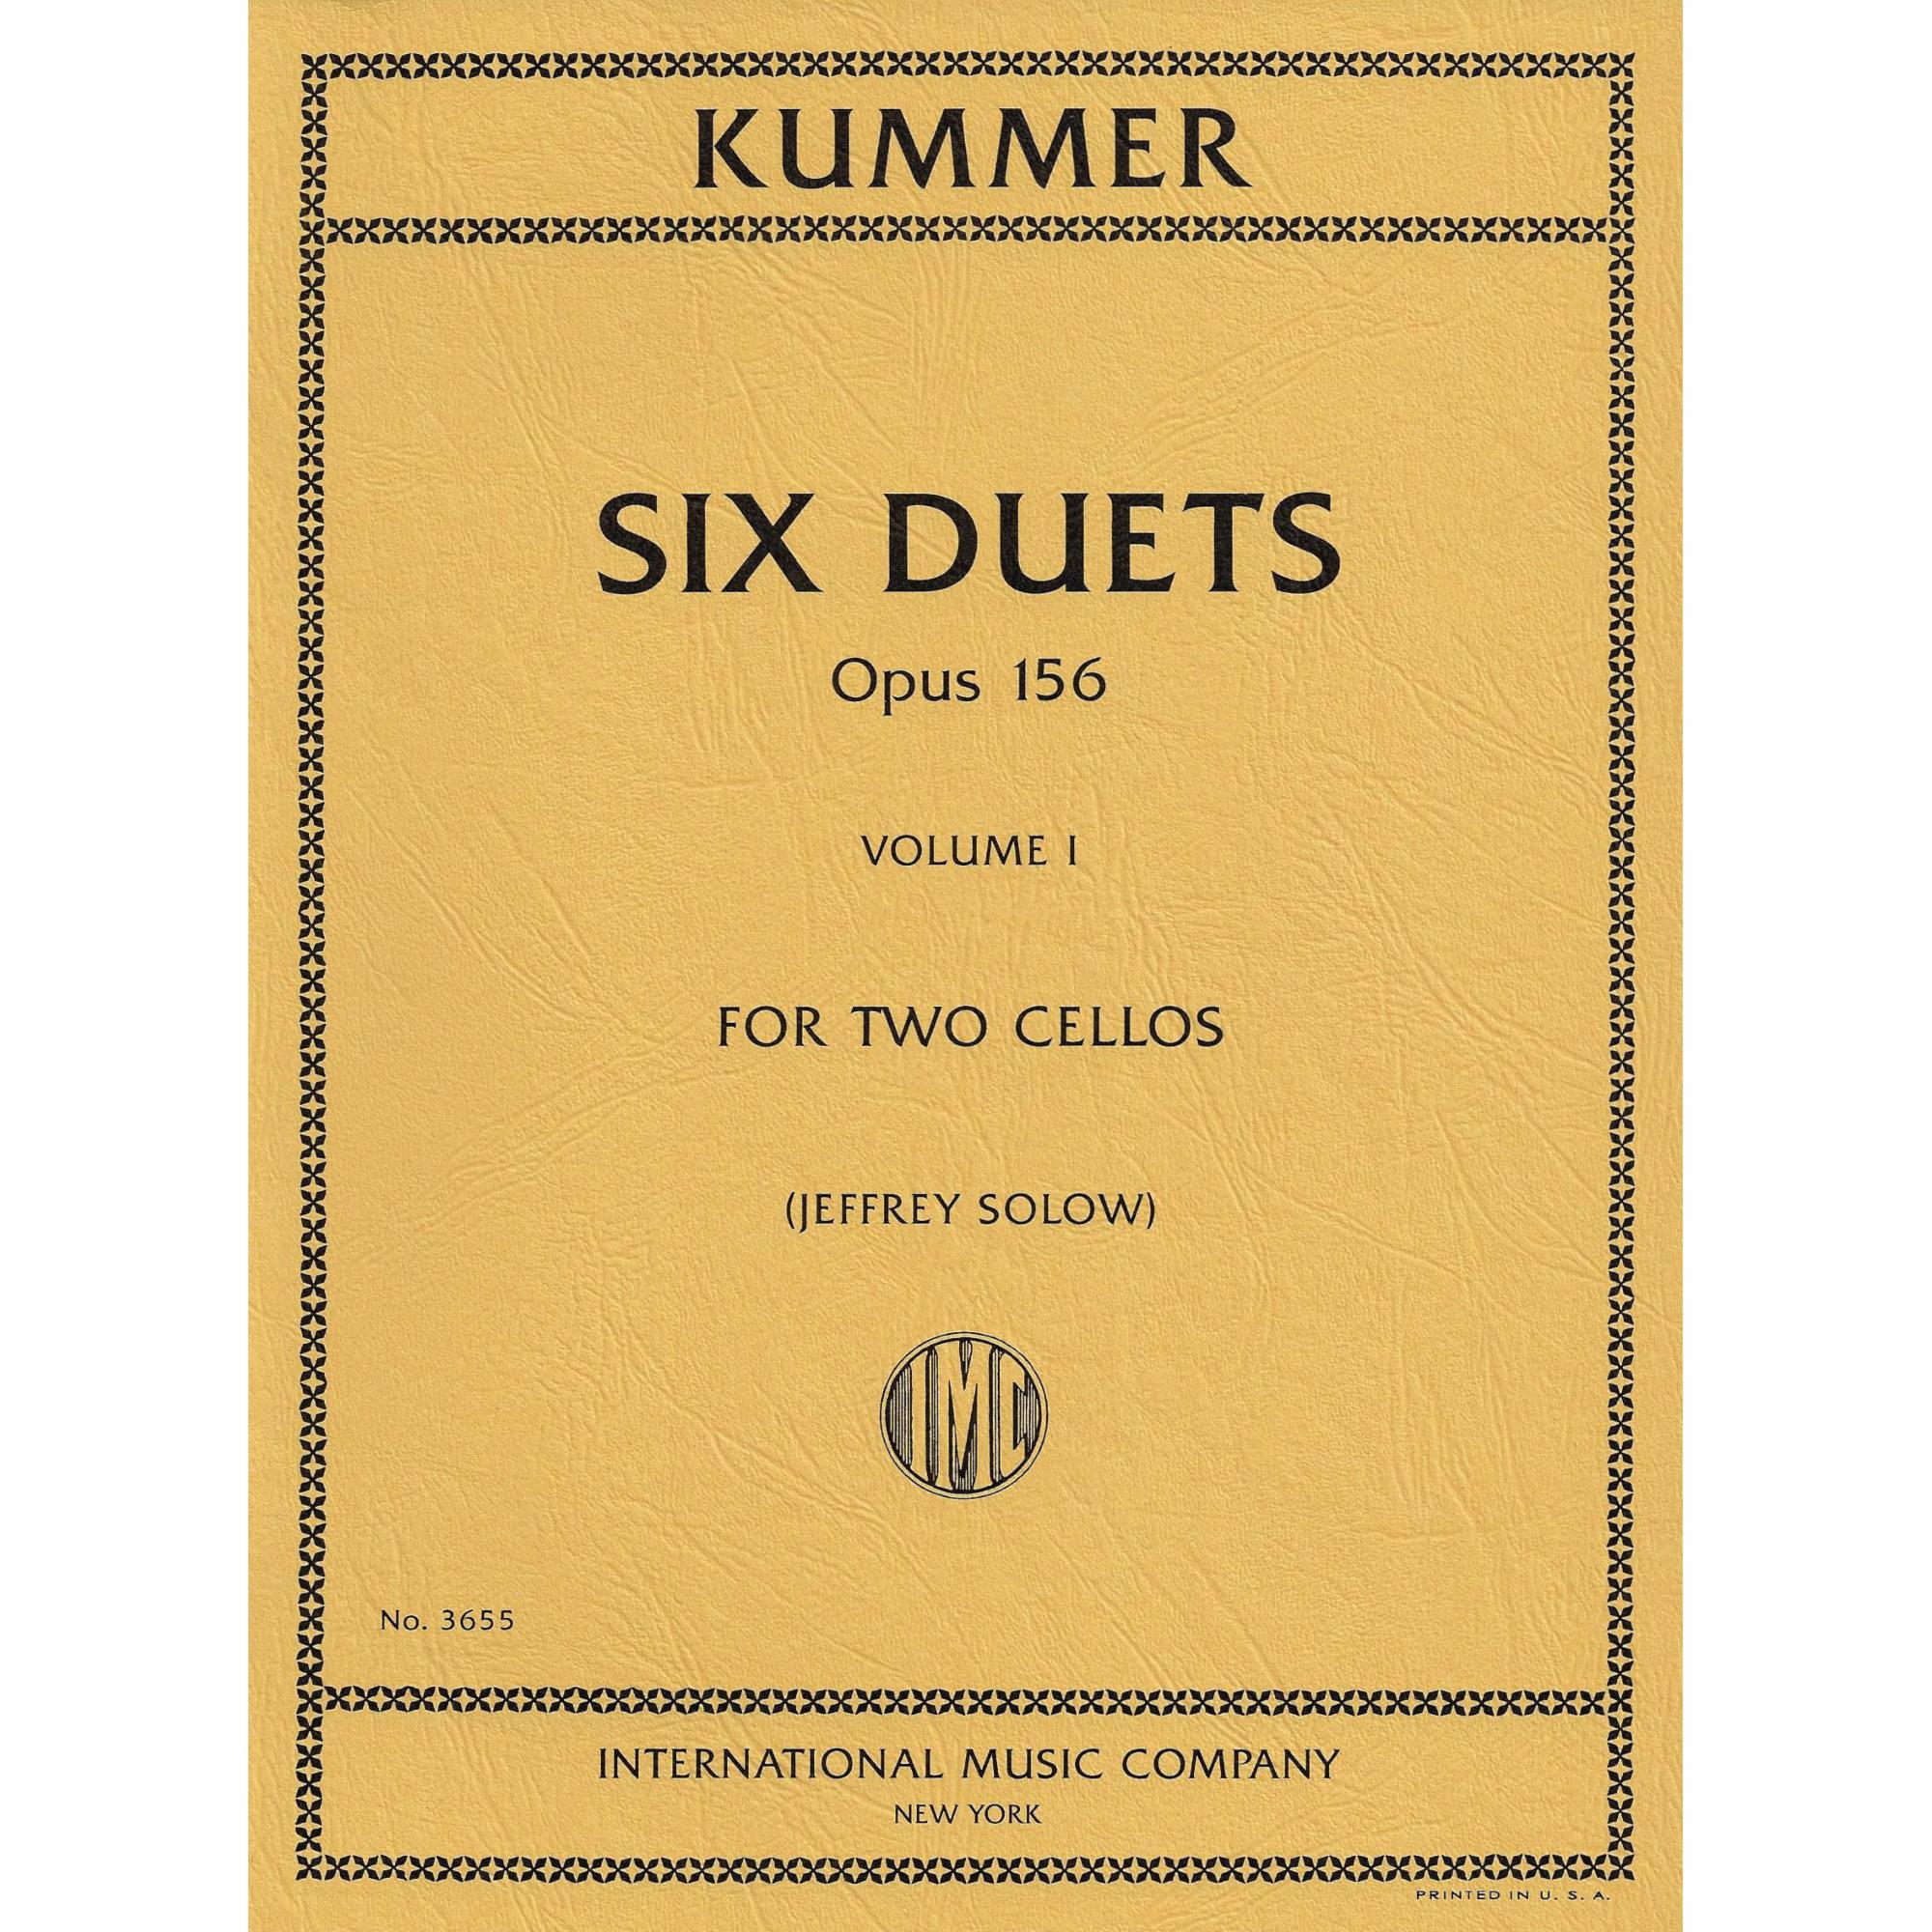 Kummer -- Six Duets, Op. 156, Volume I-II for Two Cellos